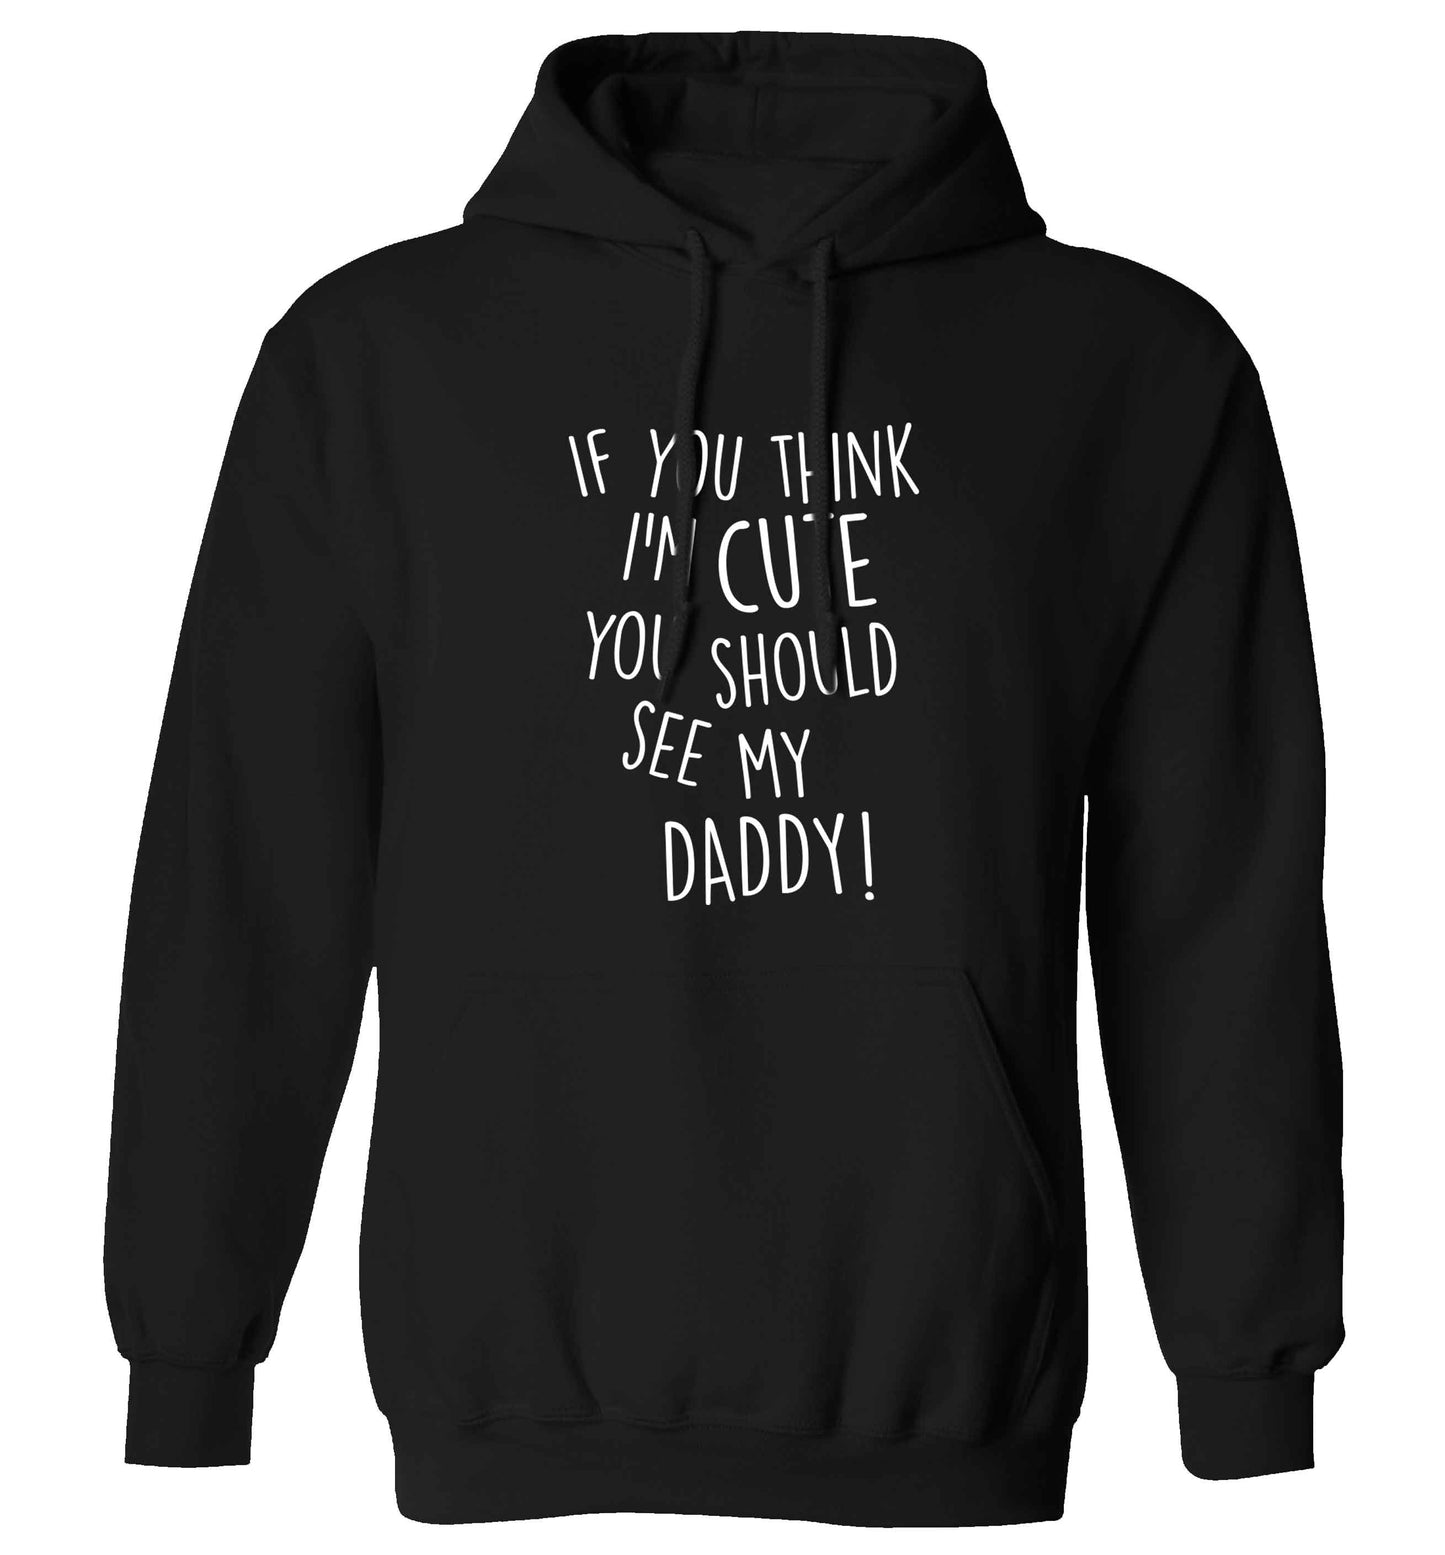 If you think I'm cute you should see my daddy adults unisex black hoodie 2XL